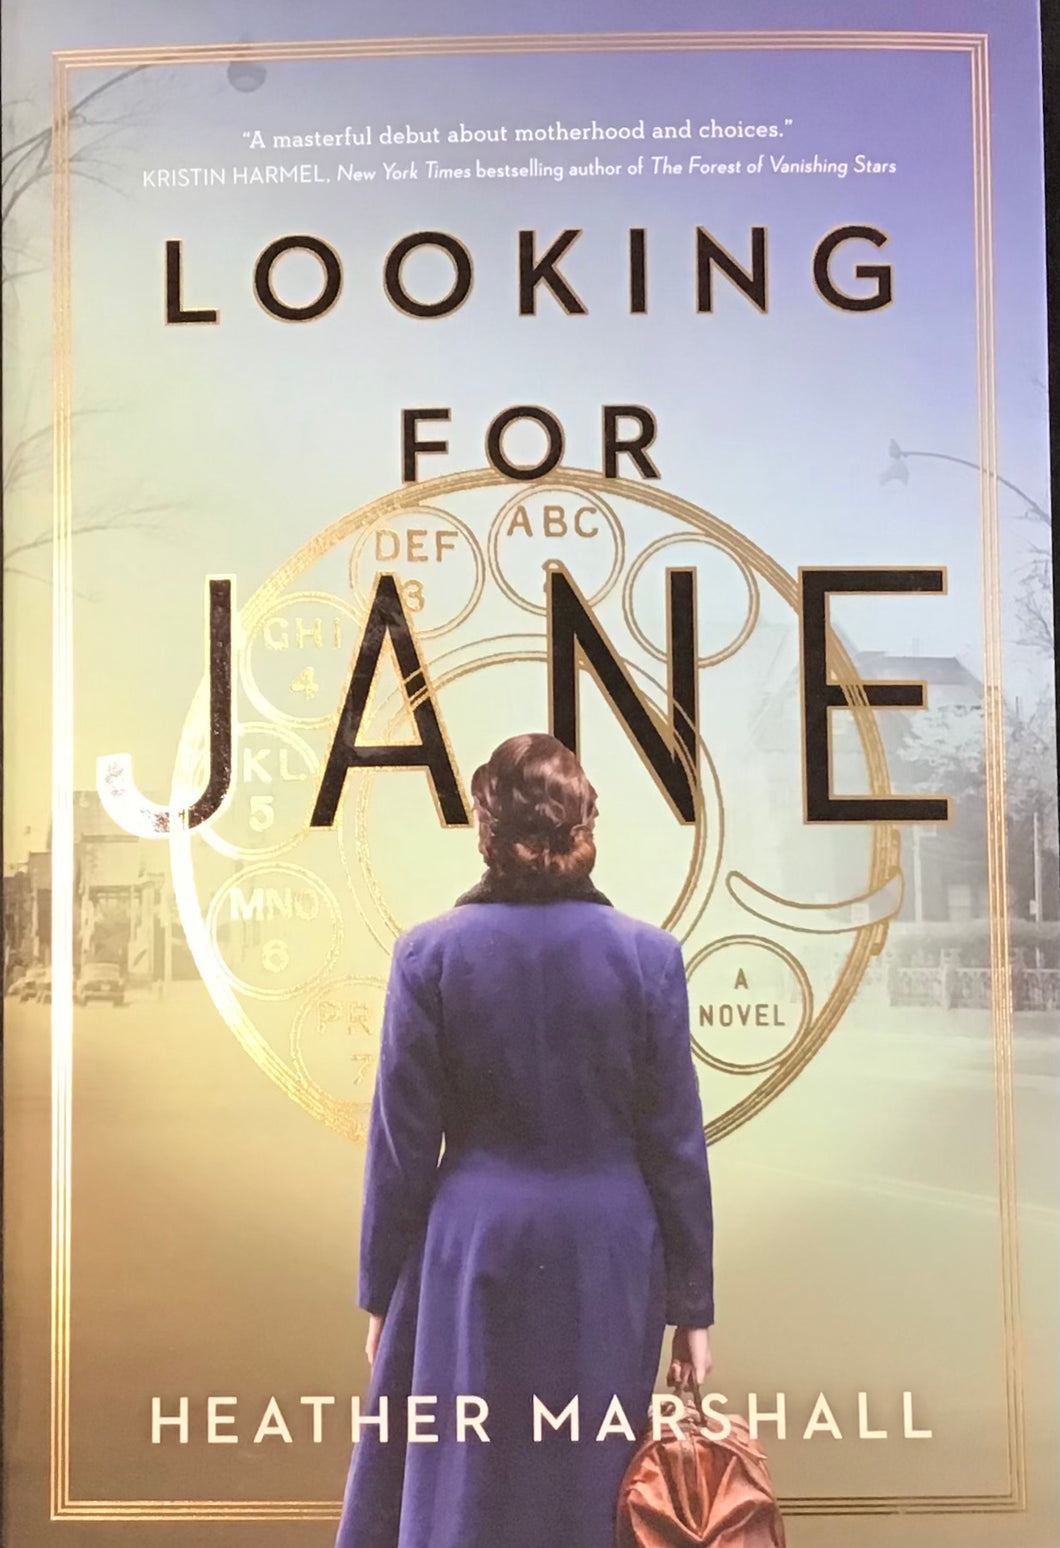 Looking For Jane, Heather Marshall